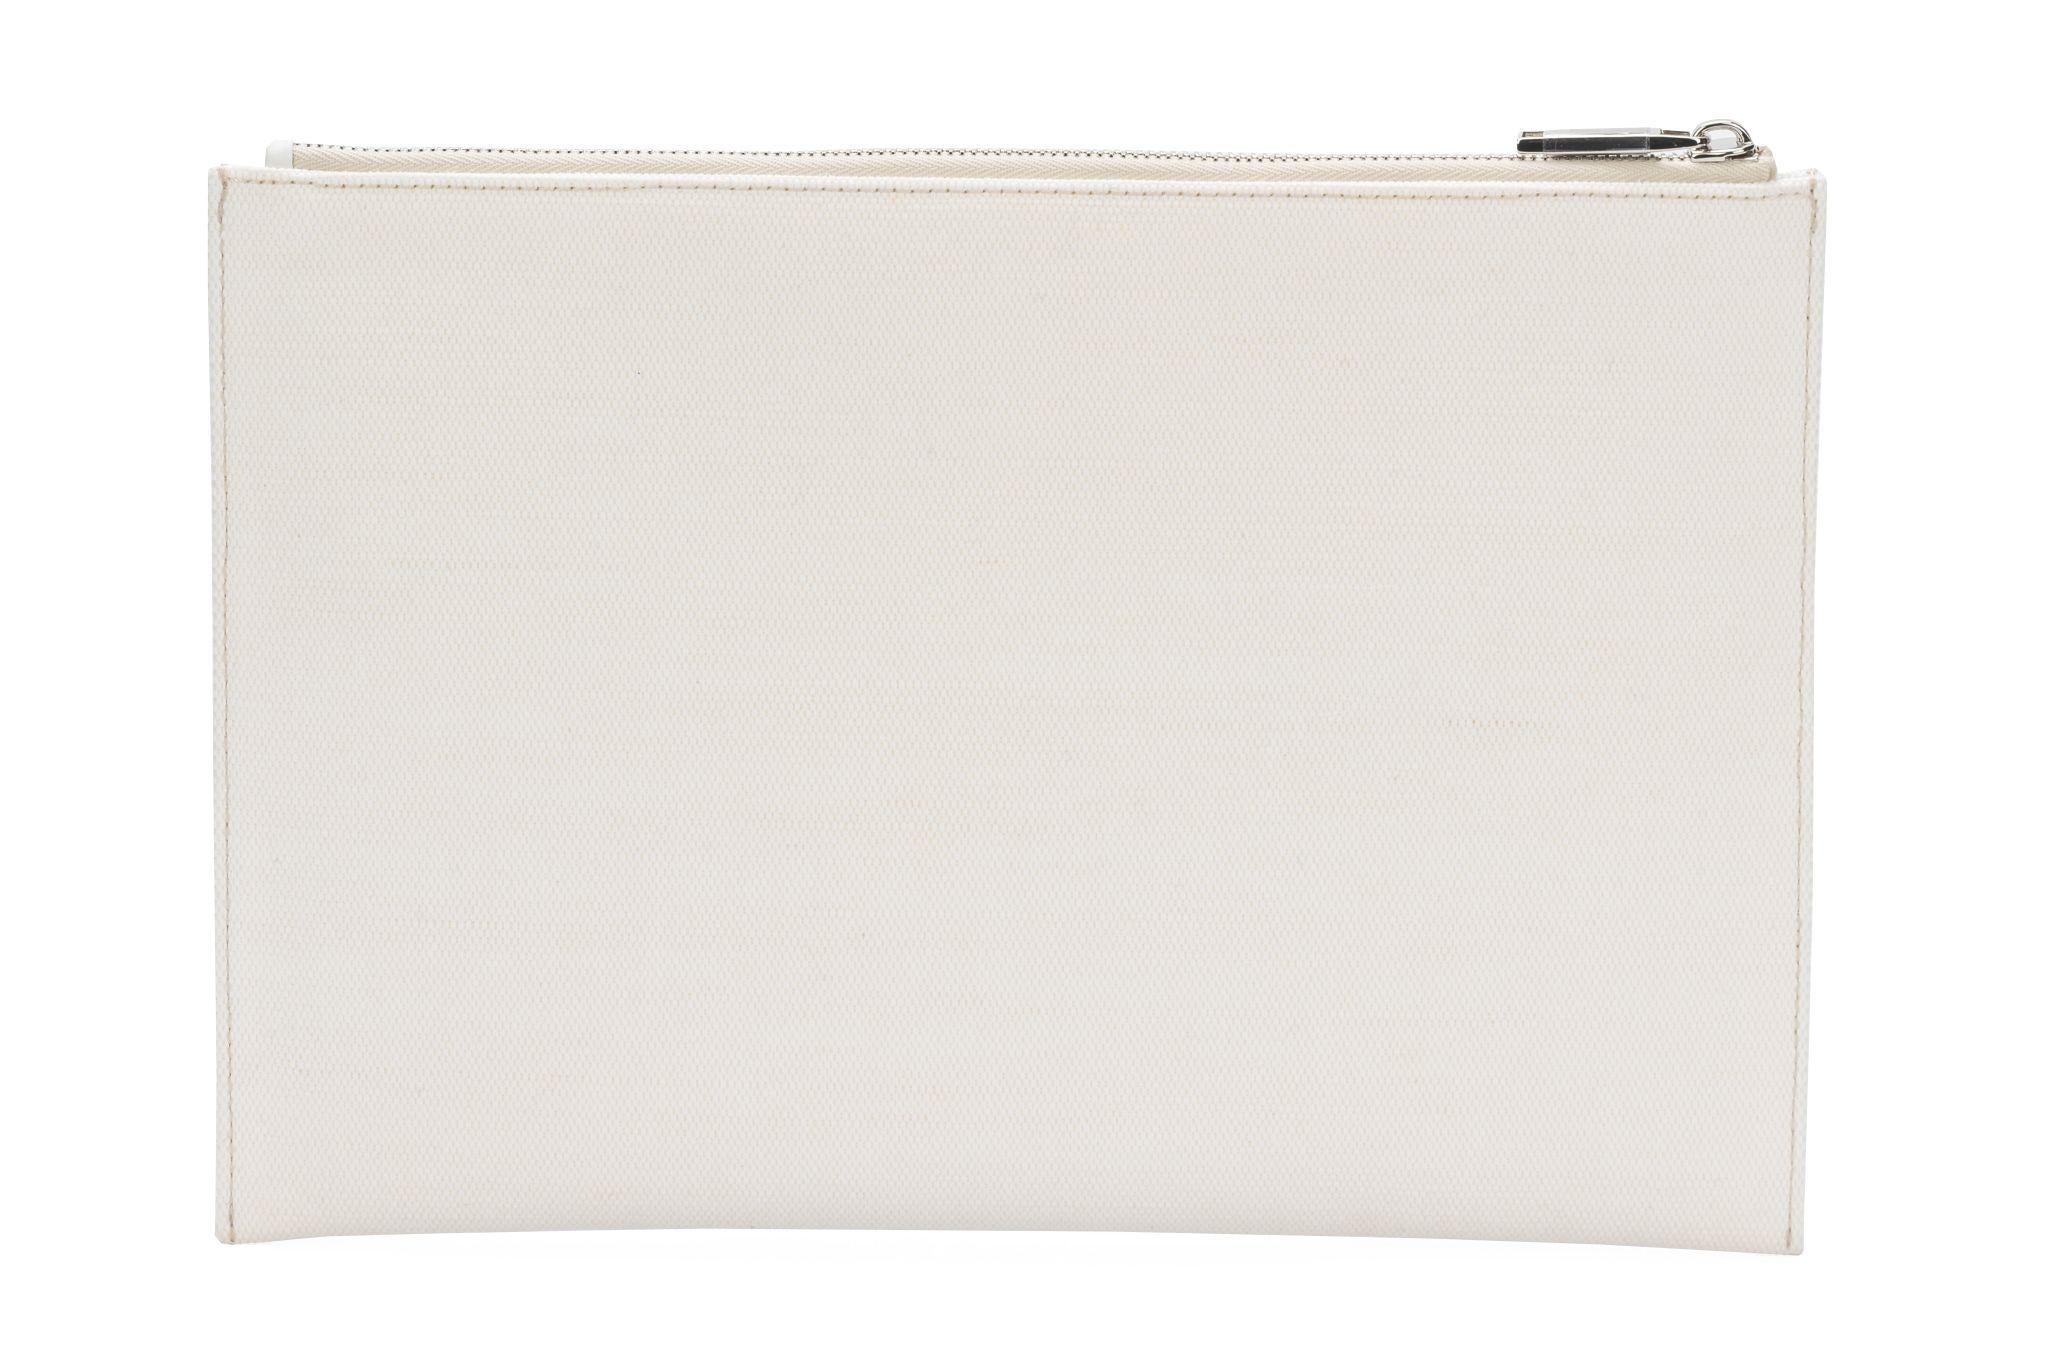 Dior New Floral Print White Clutch In New Condition For Sale In West Hollywood, CA